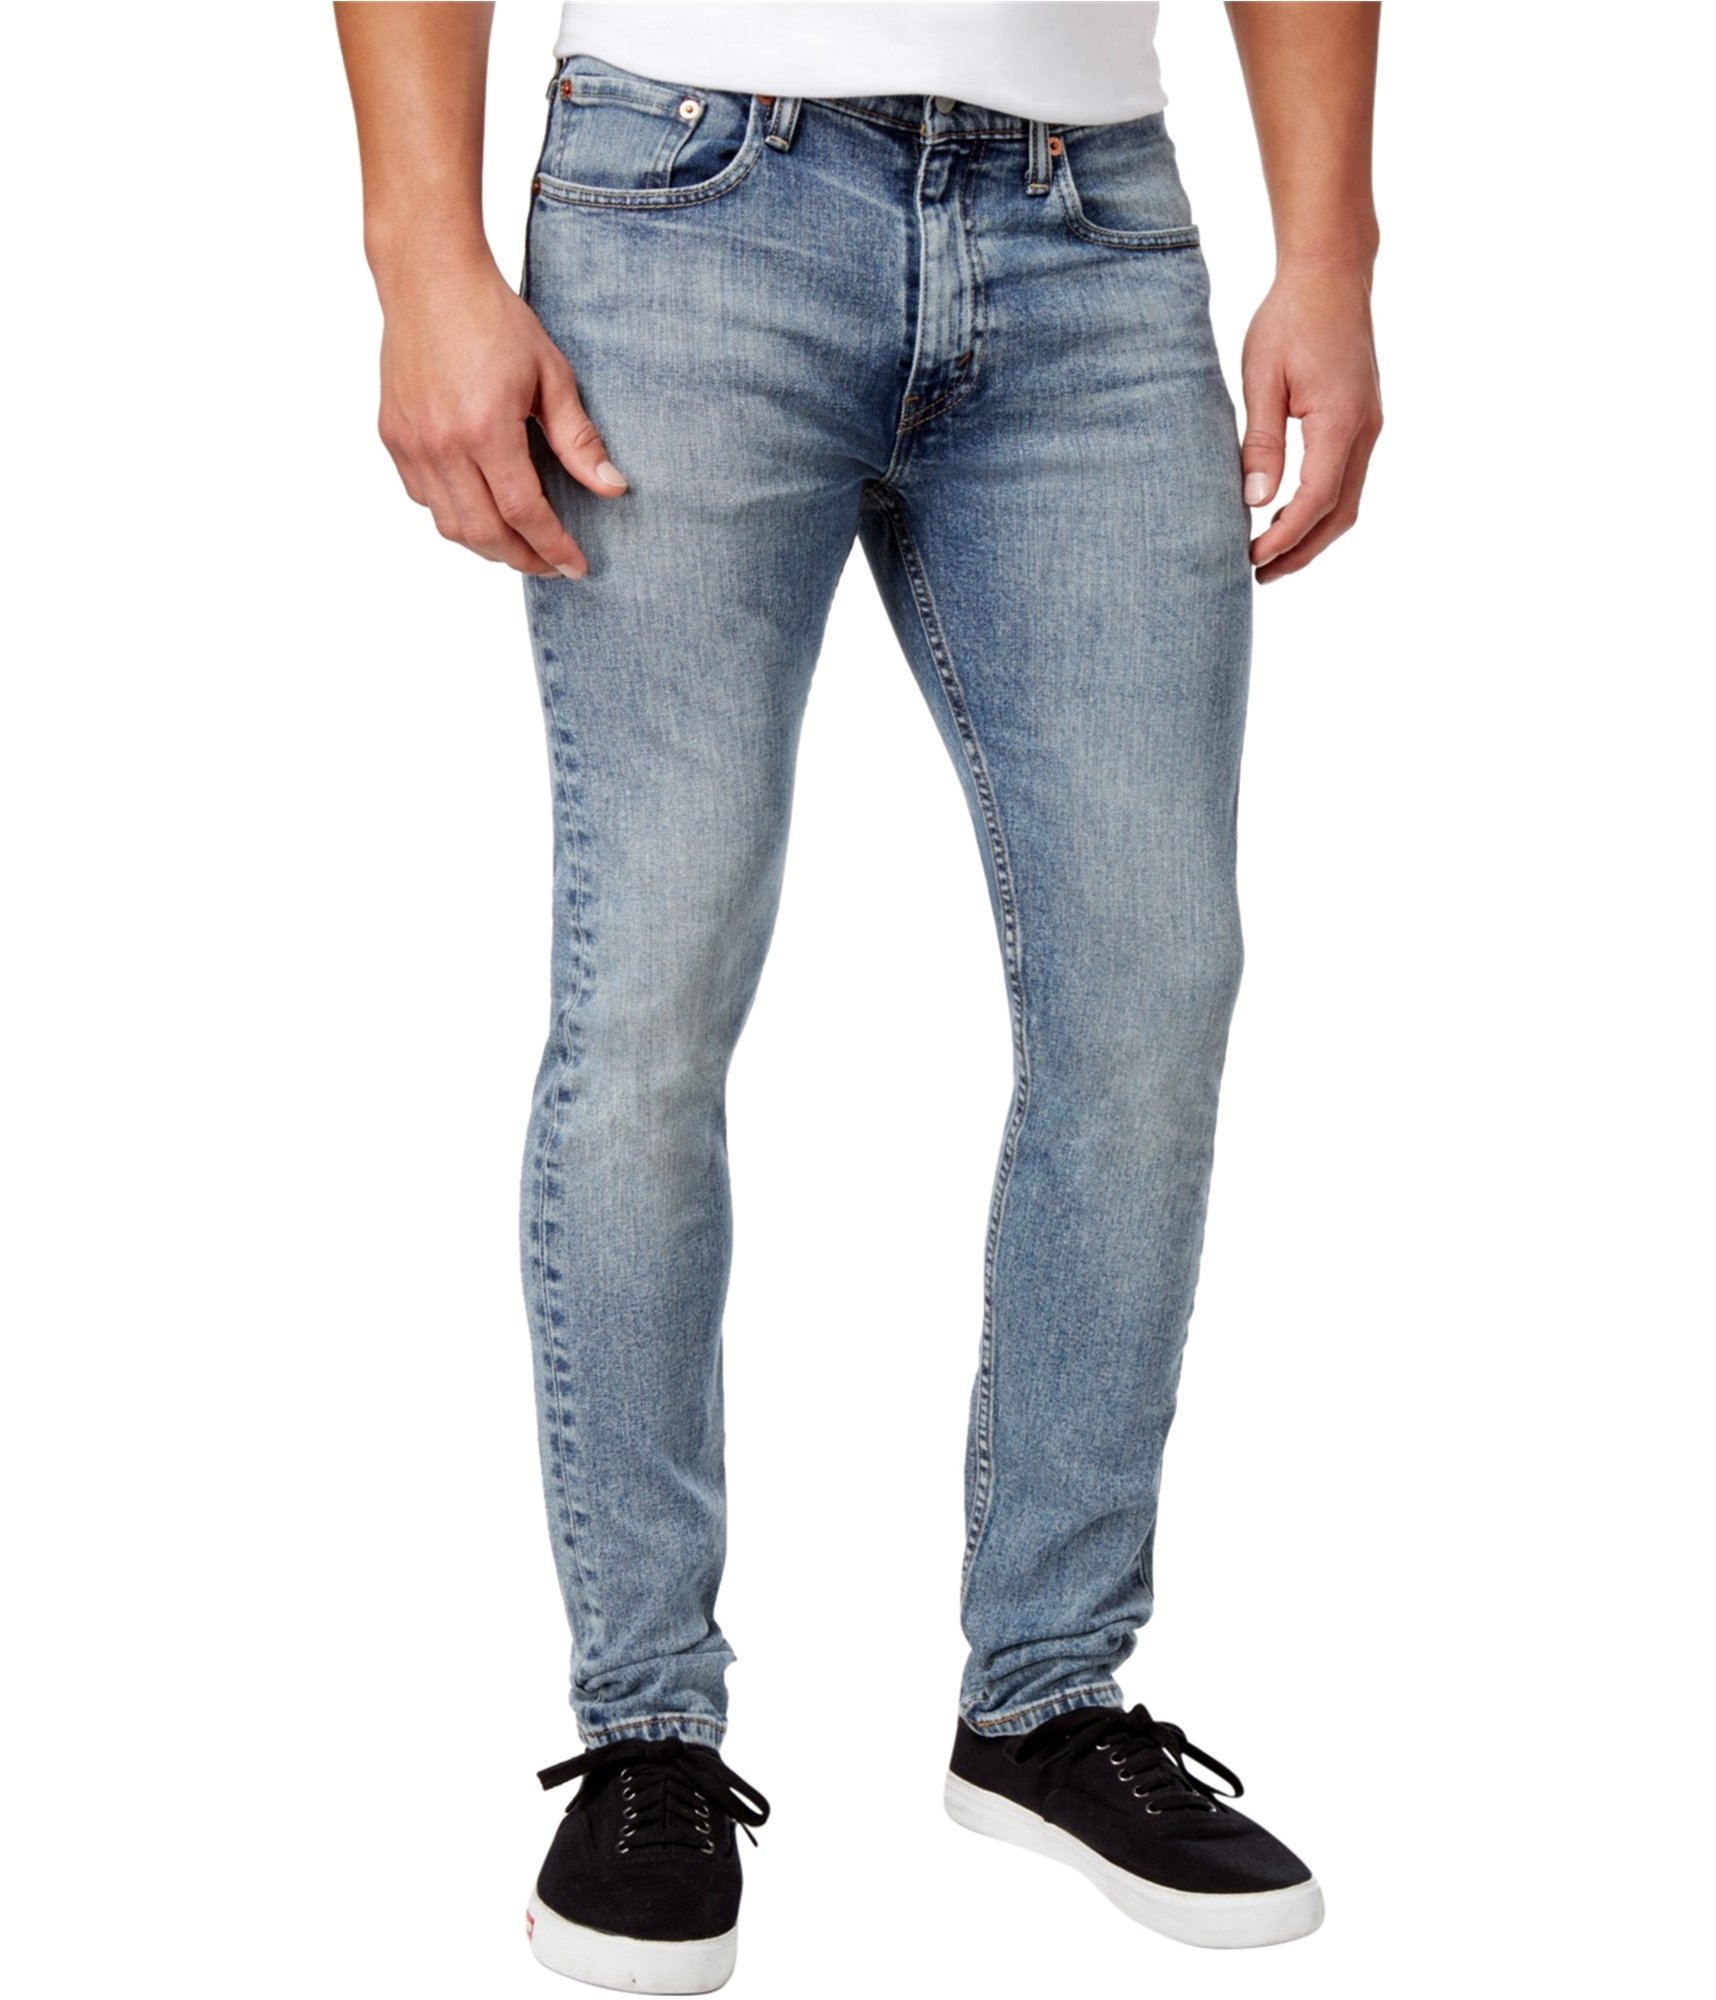 cykel hardware Motherland Buy a Mens Levi's 519 Extreme Skinny Fit Jeans Online | TagsWeekly.com, TW2